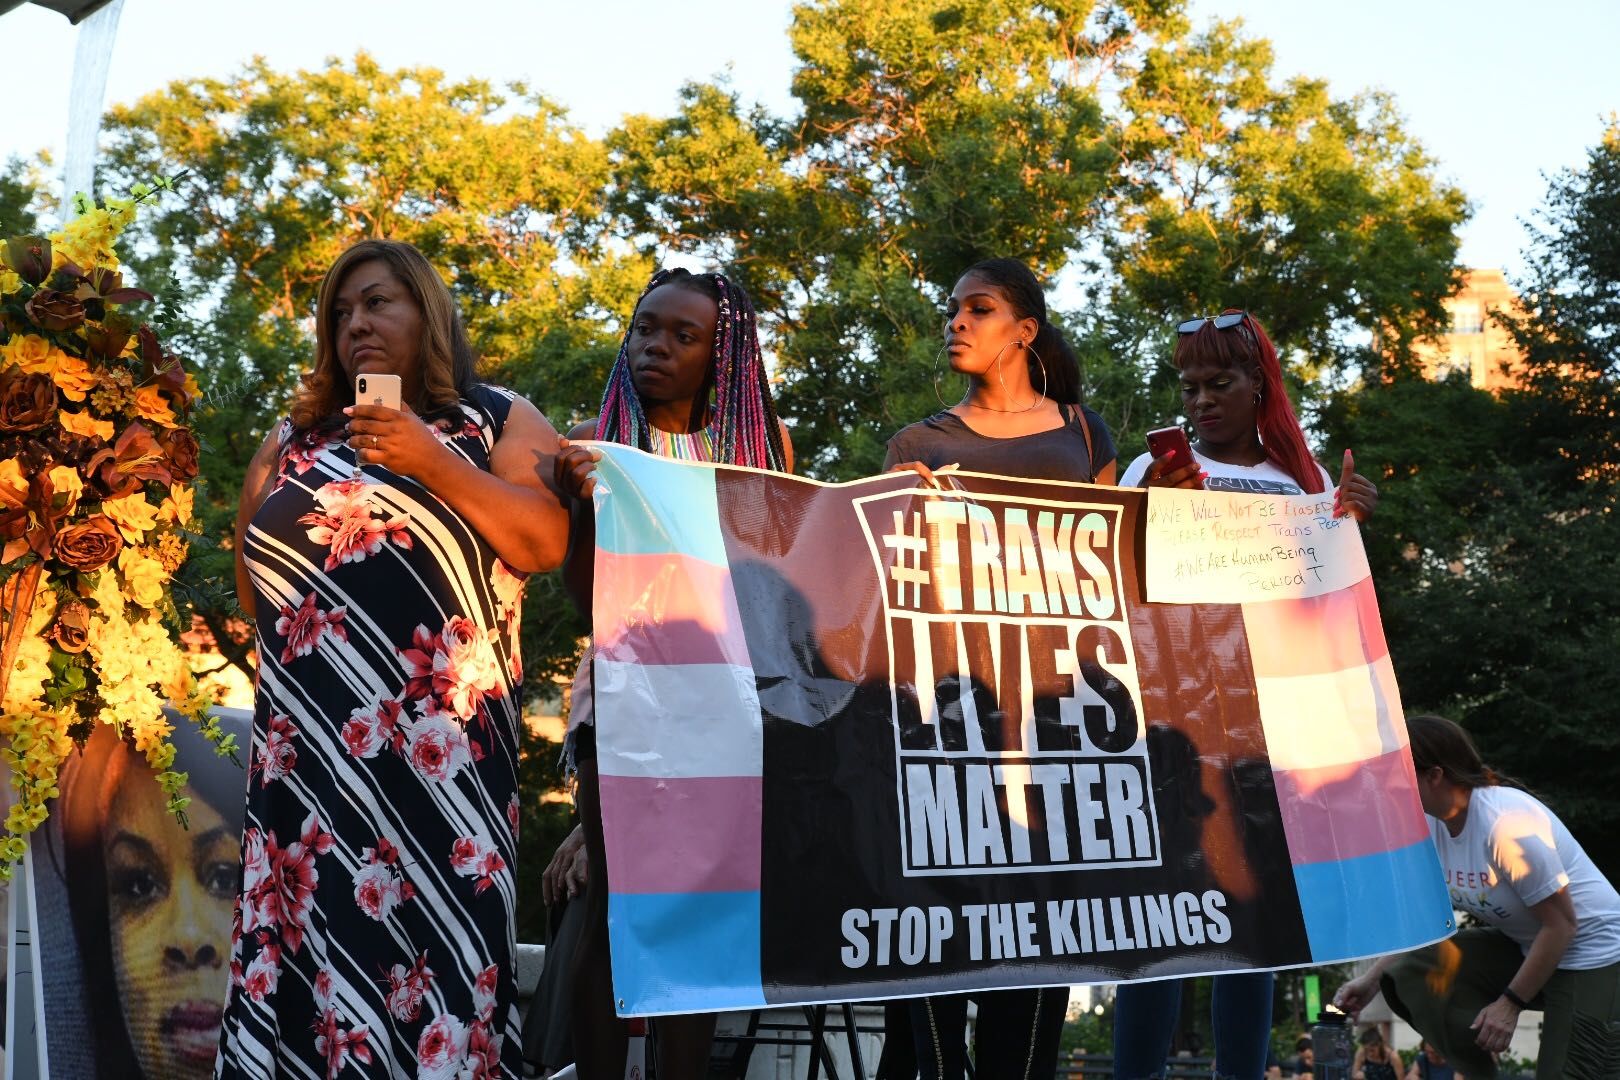 In the wake of recent violence against the LGBTQ community, people gathered at Dupont Circle or a vigil mourning the victims and calling for action. (WTOP/Alejandro Alvarez)